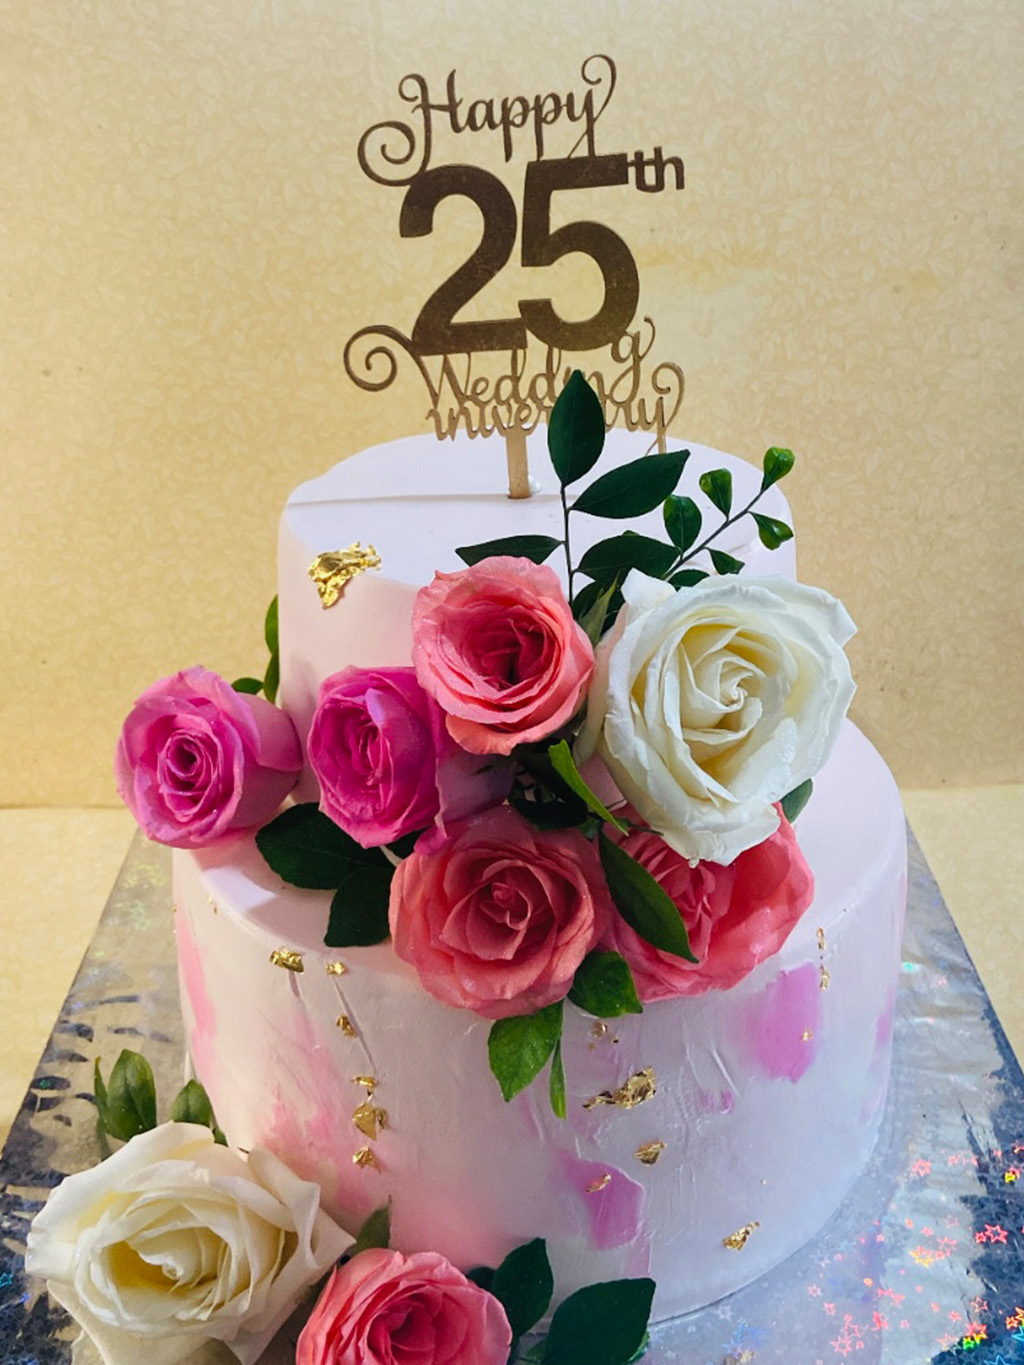 Online Anniversary Cake Delivery in Noida With Free Delivery